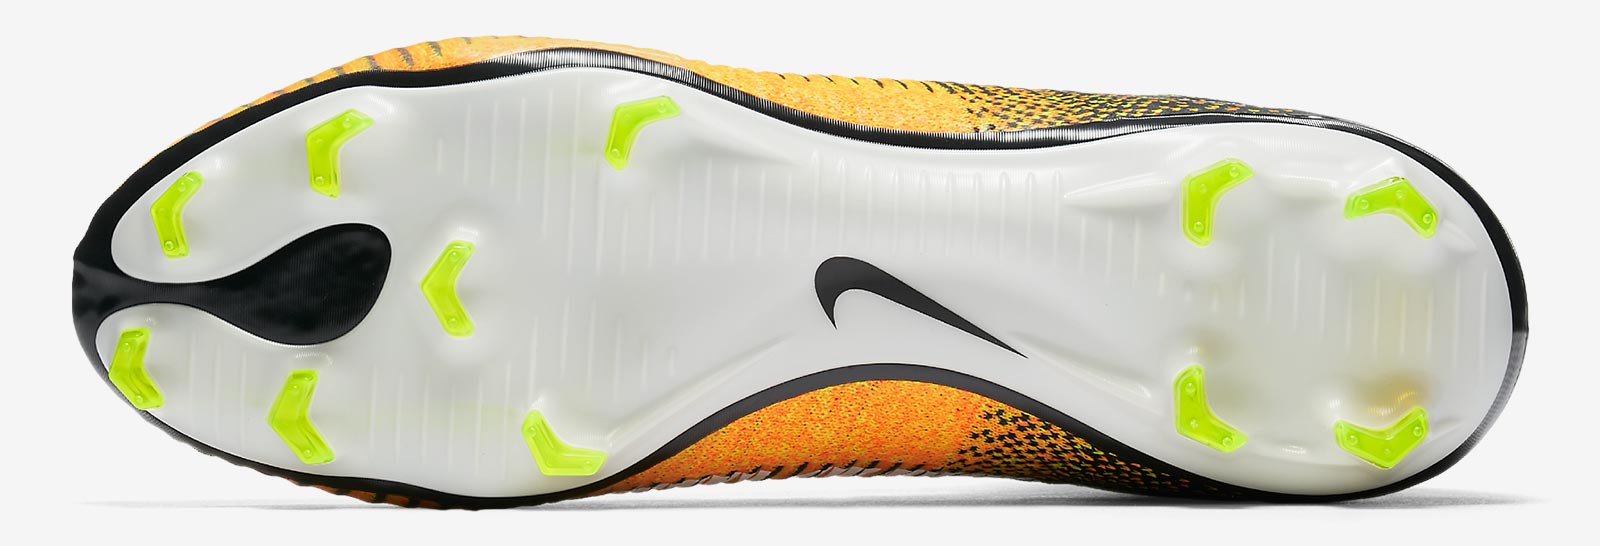 Nike Mercurial Superfly V 'Lock In Let Loose' Boots Revealed - Footy ...